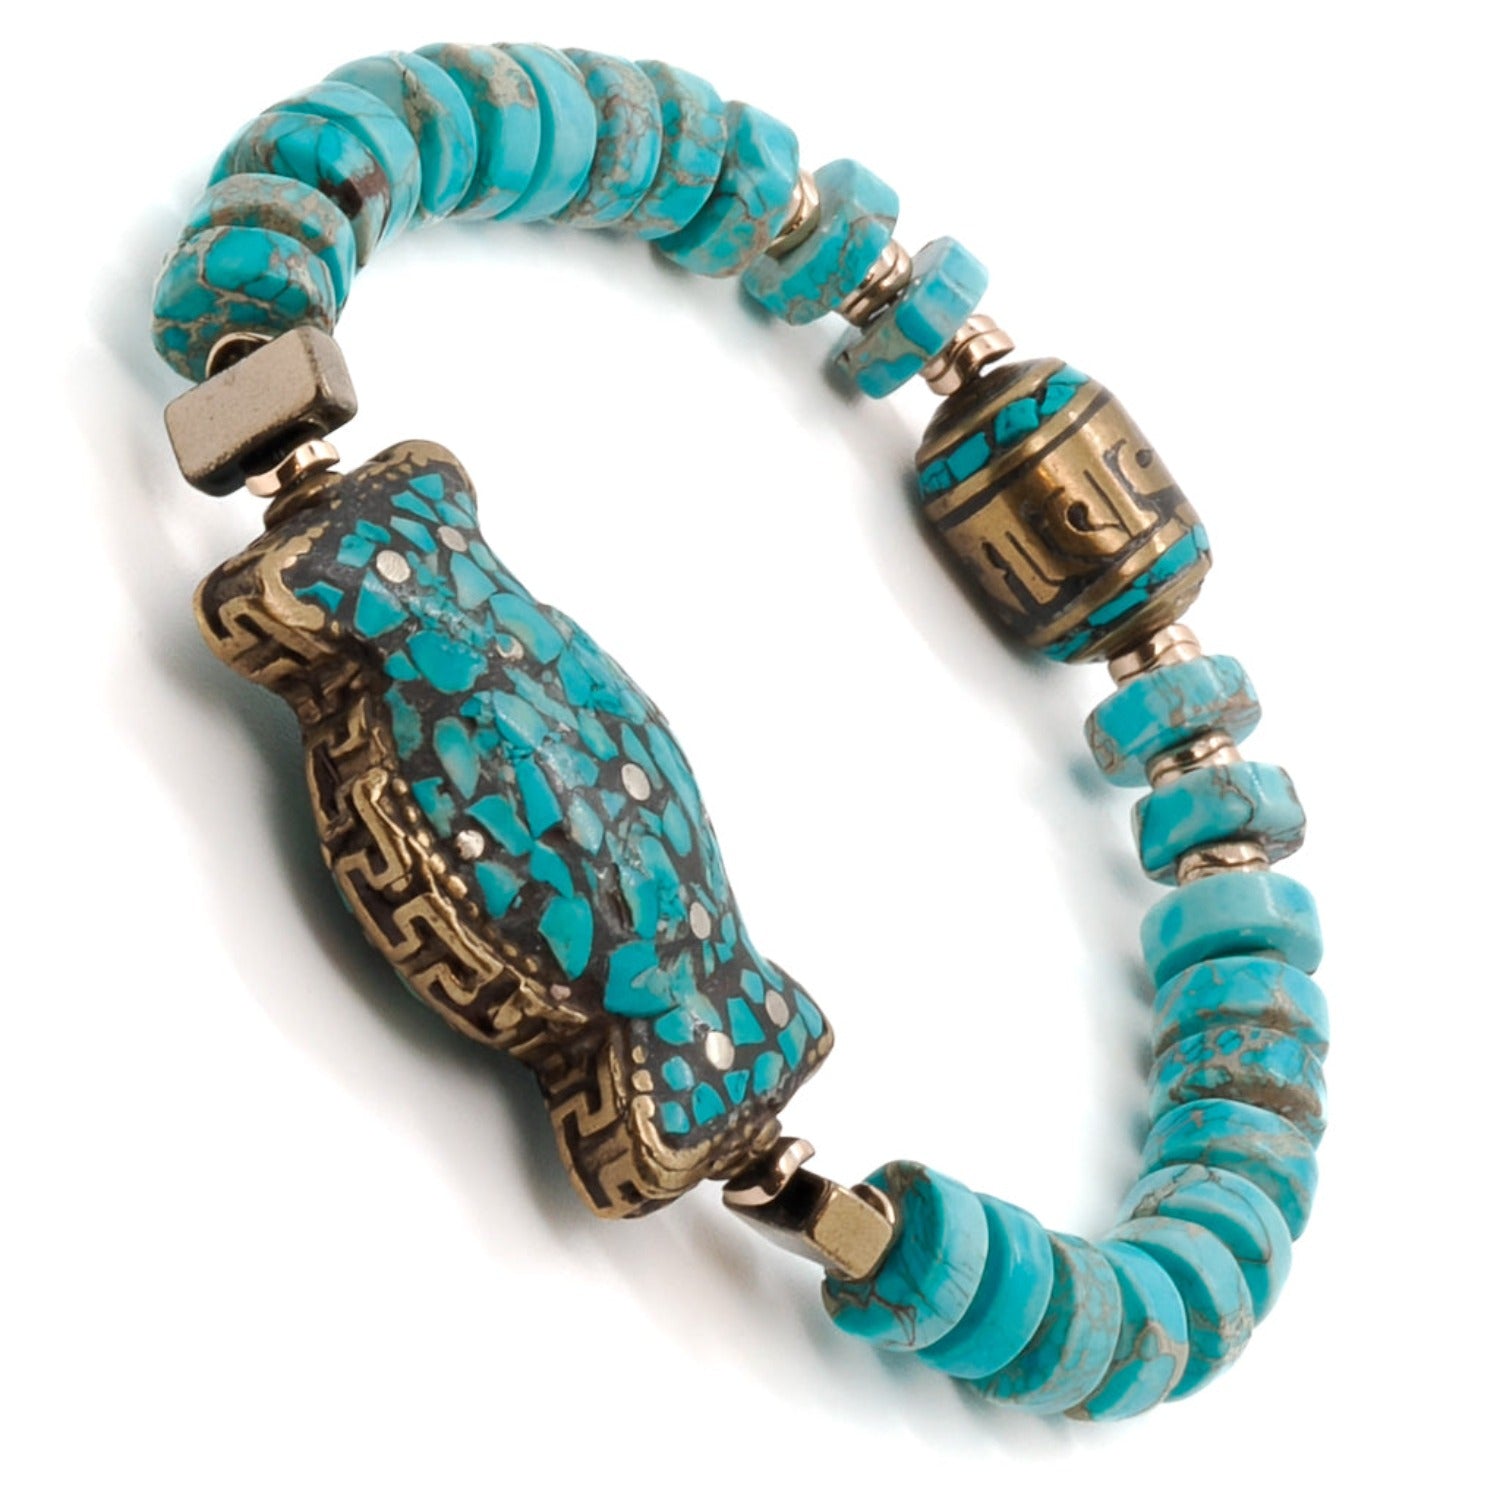 Turquoise stone beads promote inner calm and purification